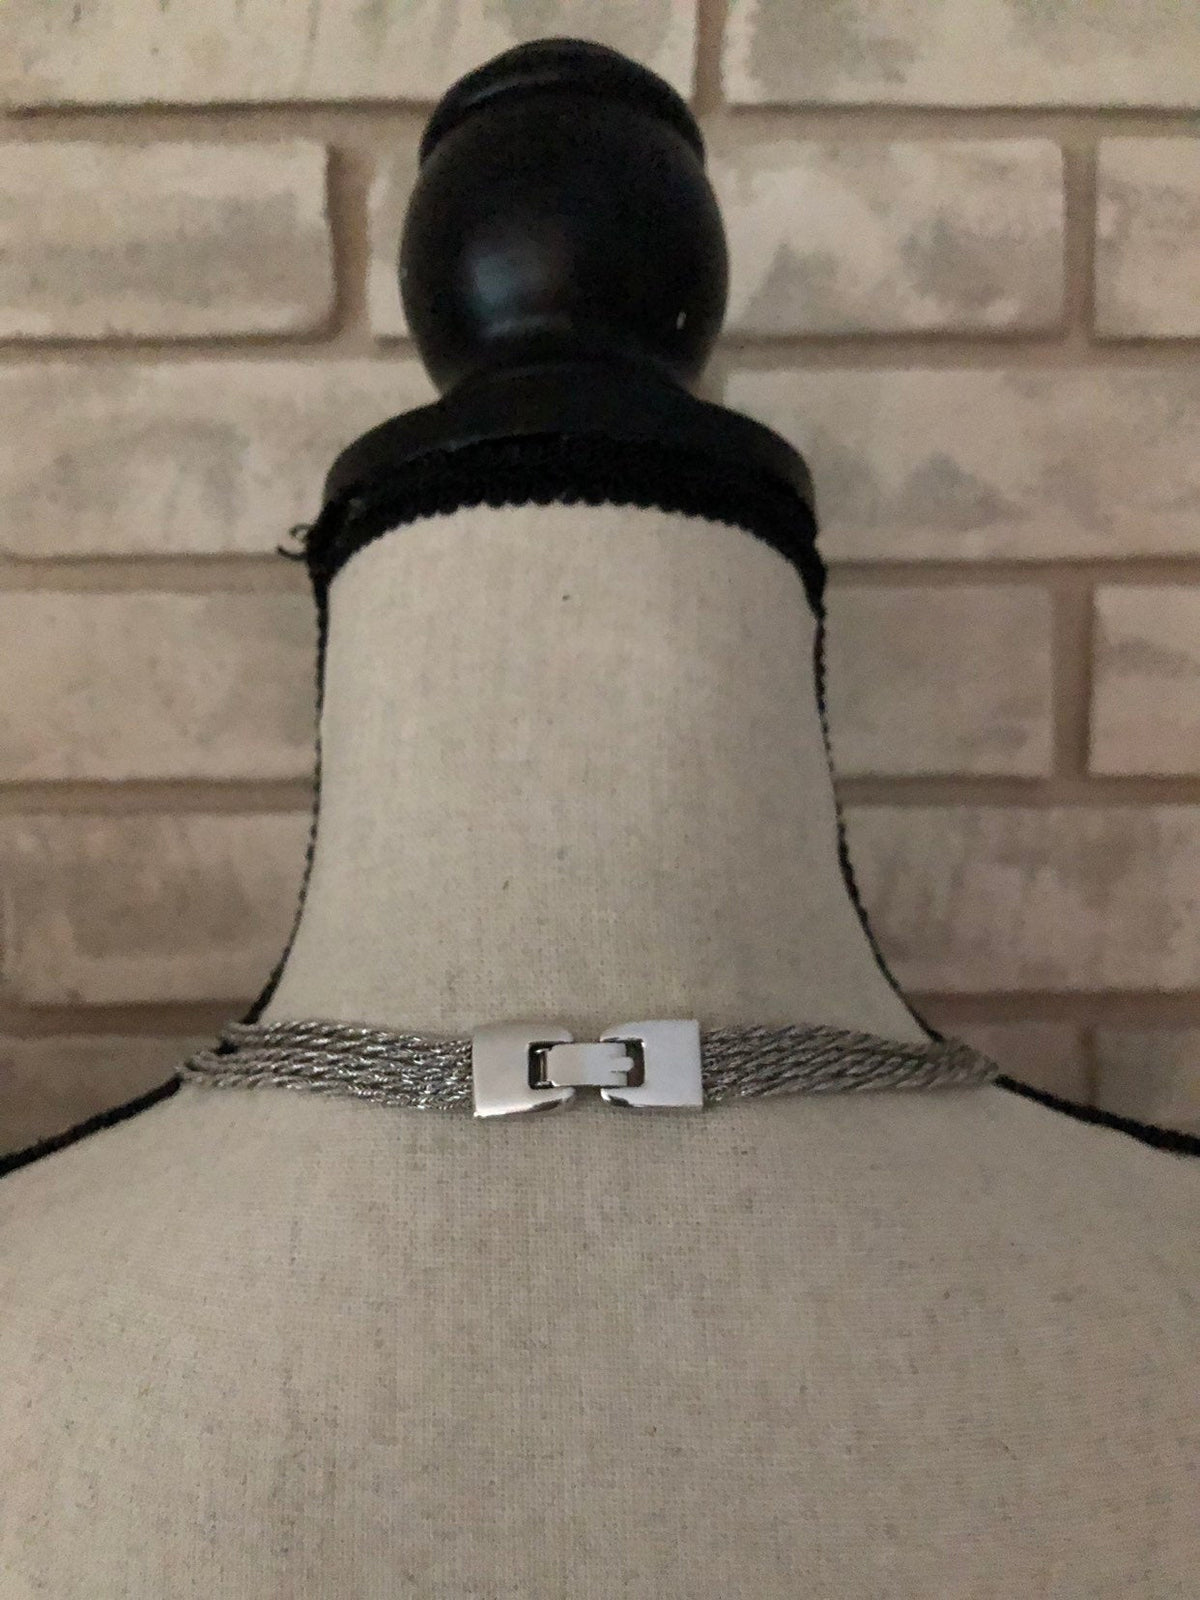 Givenchy Silver Multi-Chain Vintage Necklace - 24 Wishes Vintage Jewelry